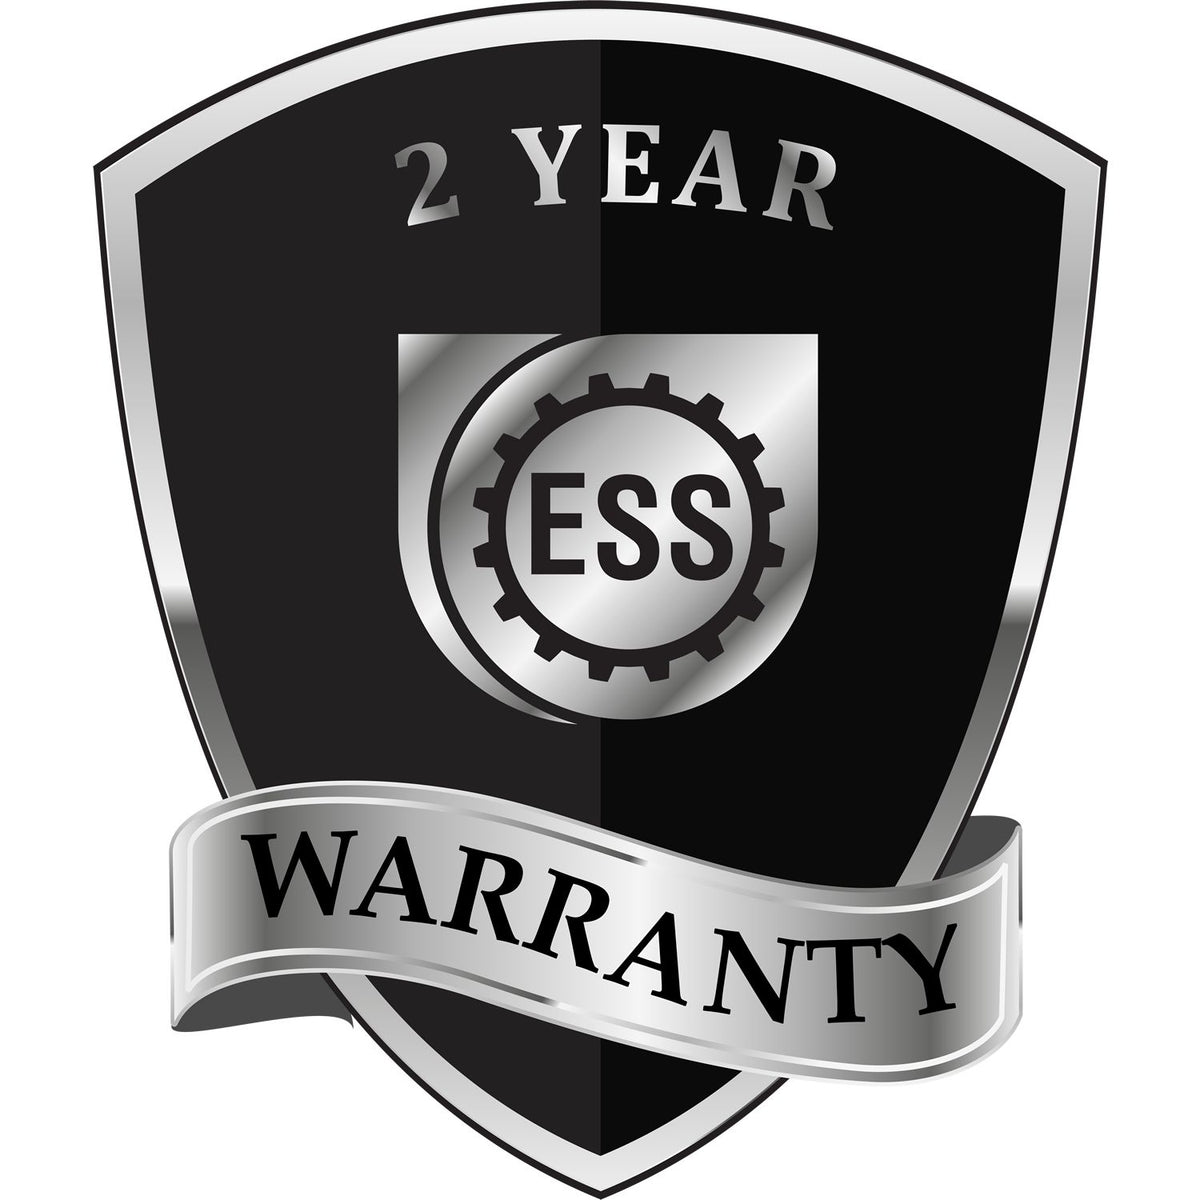 A black and silver badge or emblem showing warranty information for the Gift Oklahoma Land Surveyor Seal